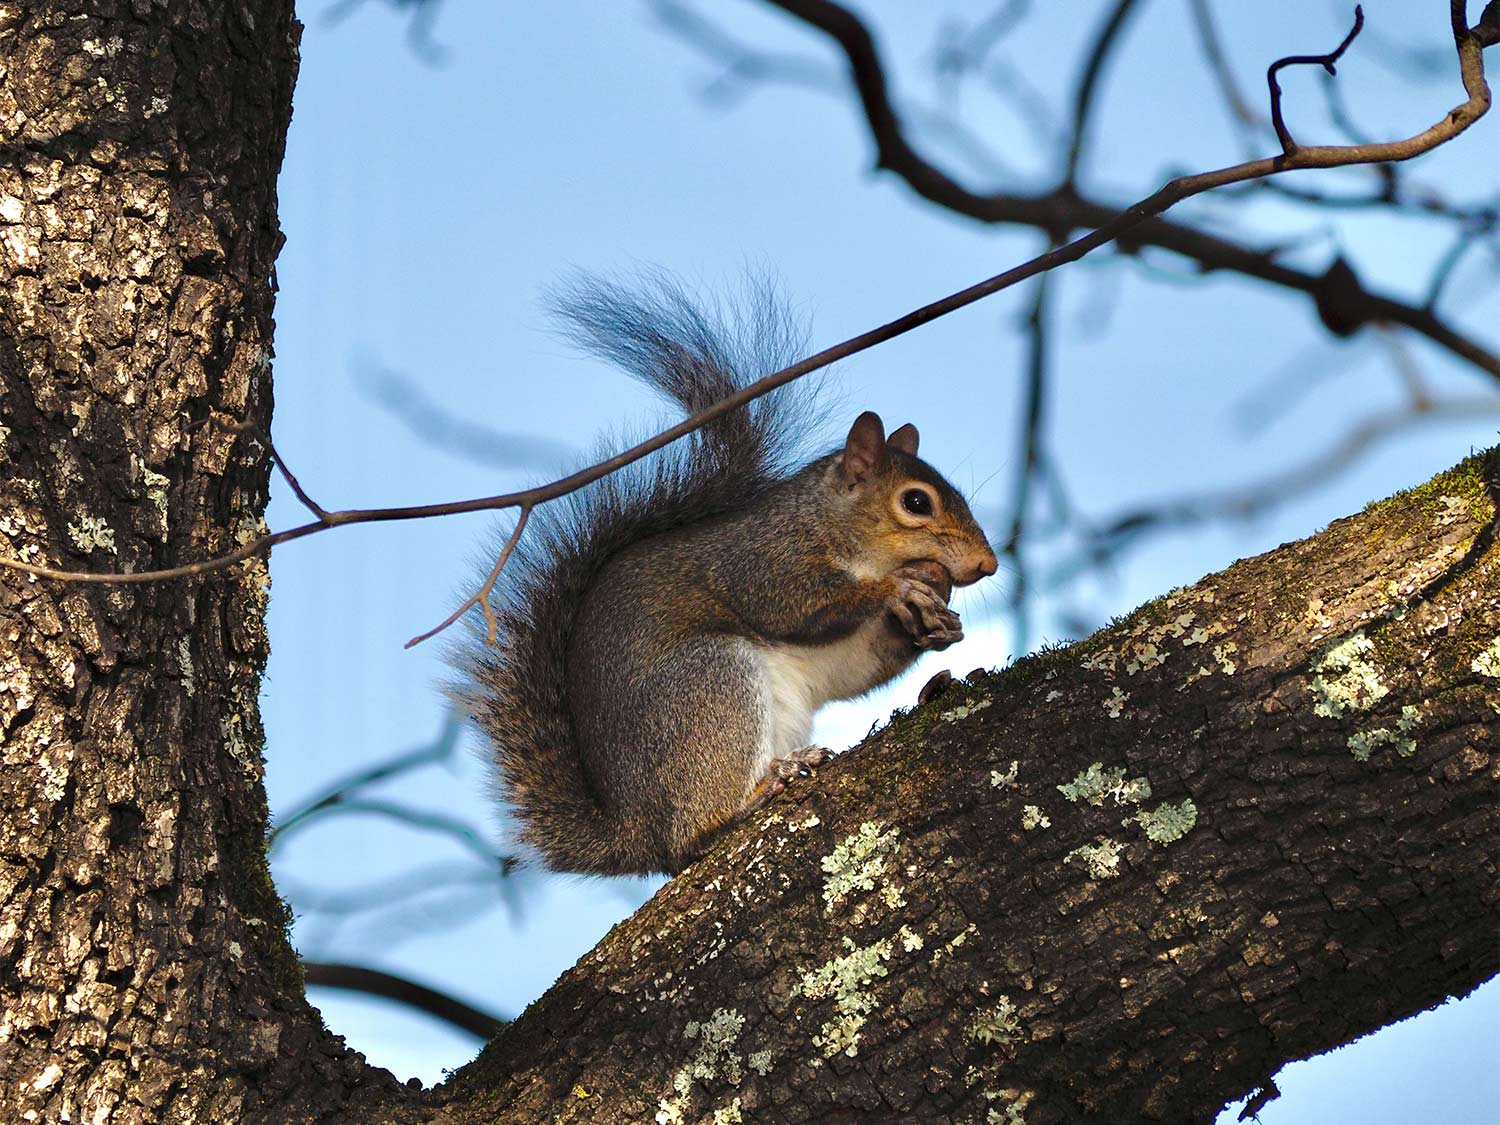 Squirrel Trapping & Legalities: What You Need to Know